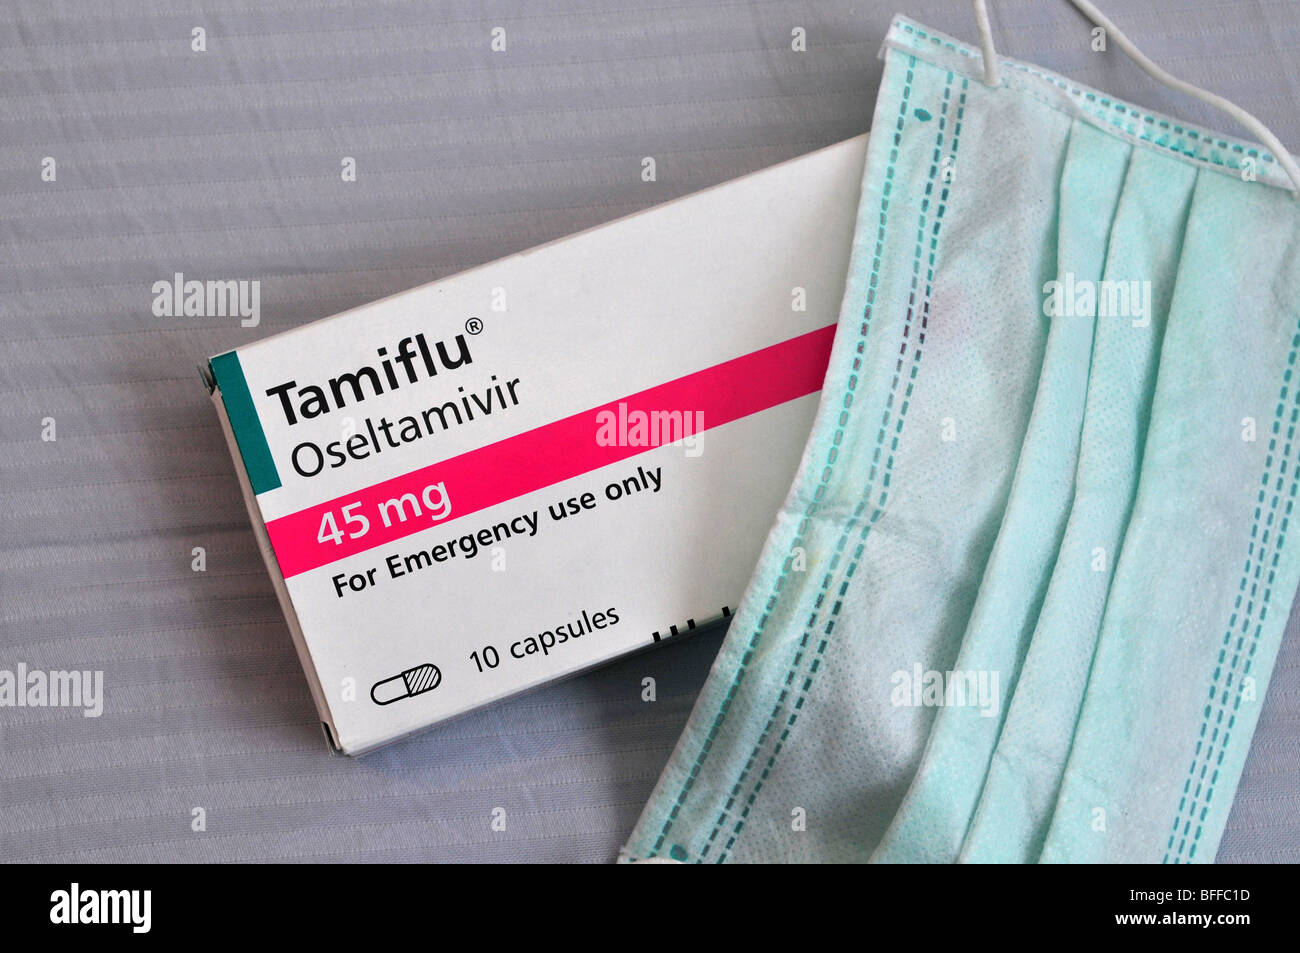 A medical face mask and a pack of Tamiflu tablets agaist Swine flu, October 30, 2009. Stock Photo